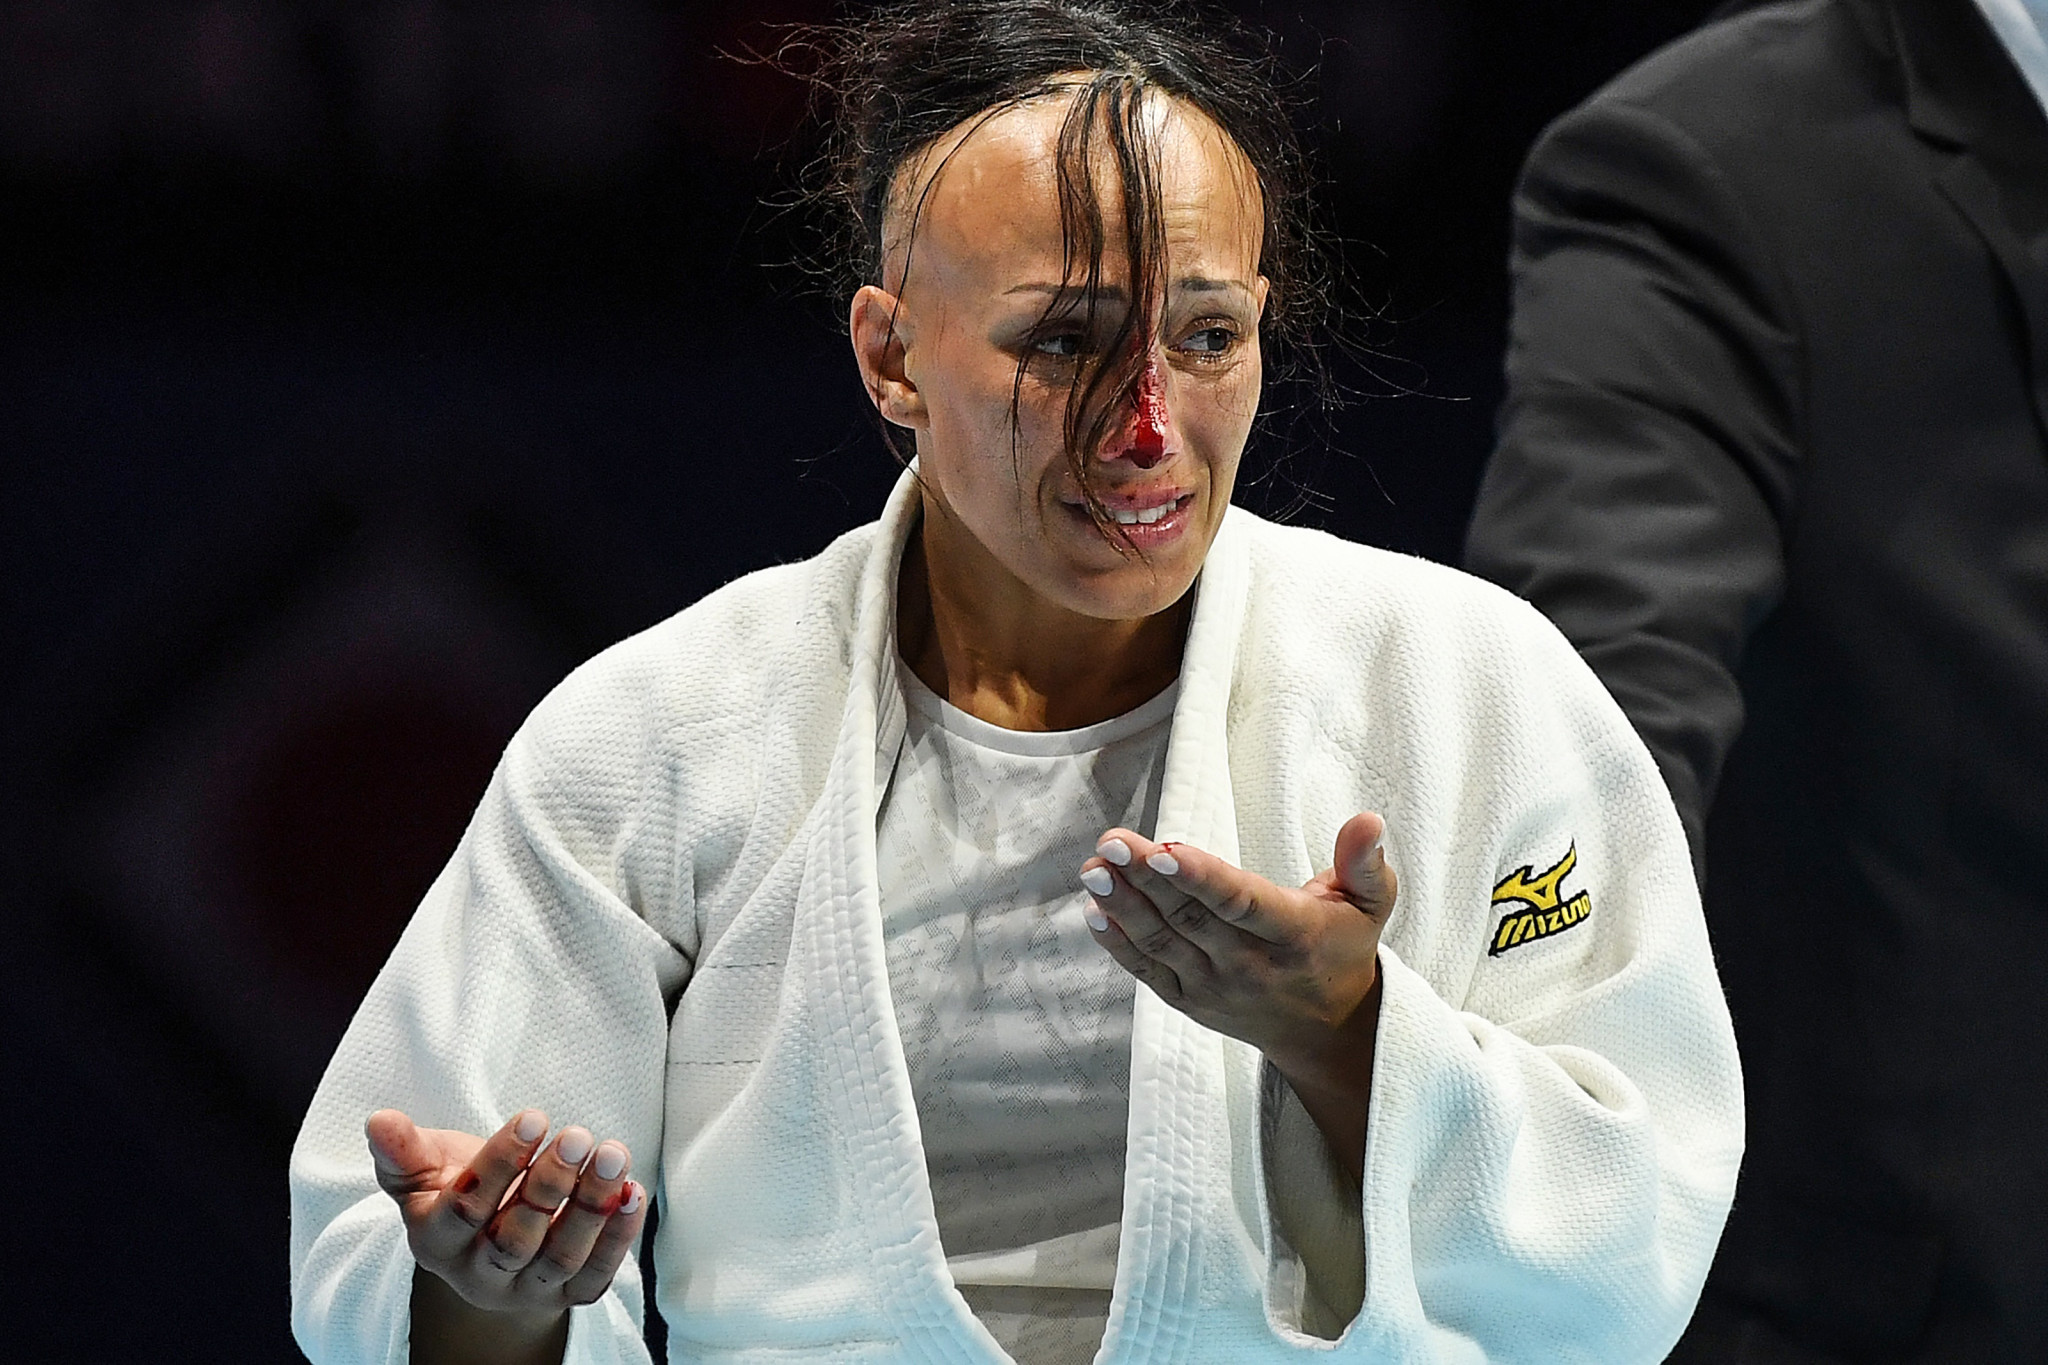 Mejlinda Kelmendi won bronze following a fight with a seven minute injury delay after Joana Ramos, pictured, suffered a broken nose ©Getty Images